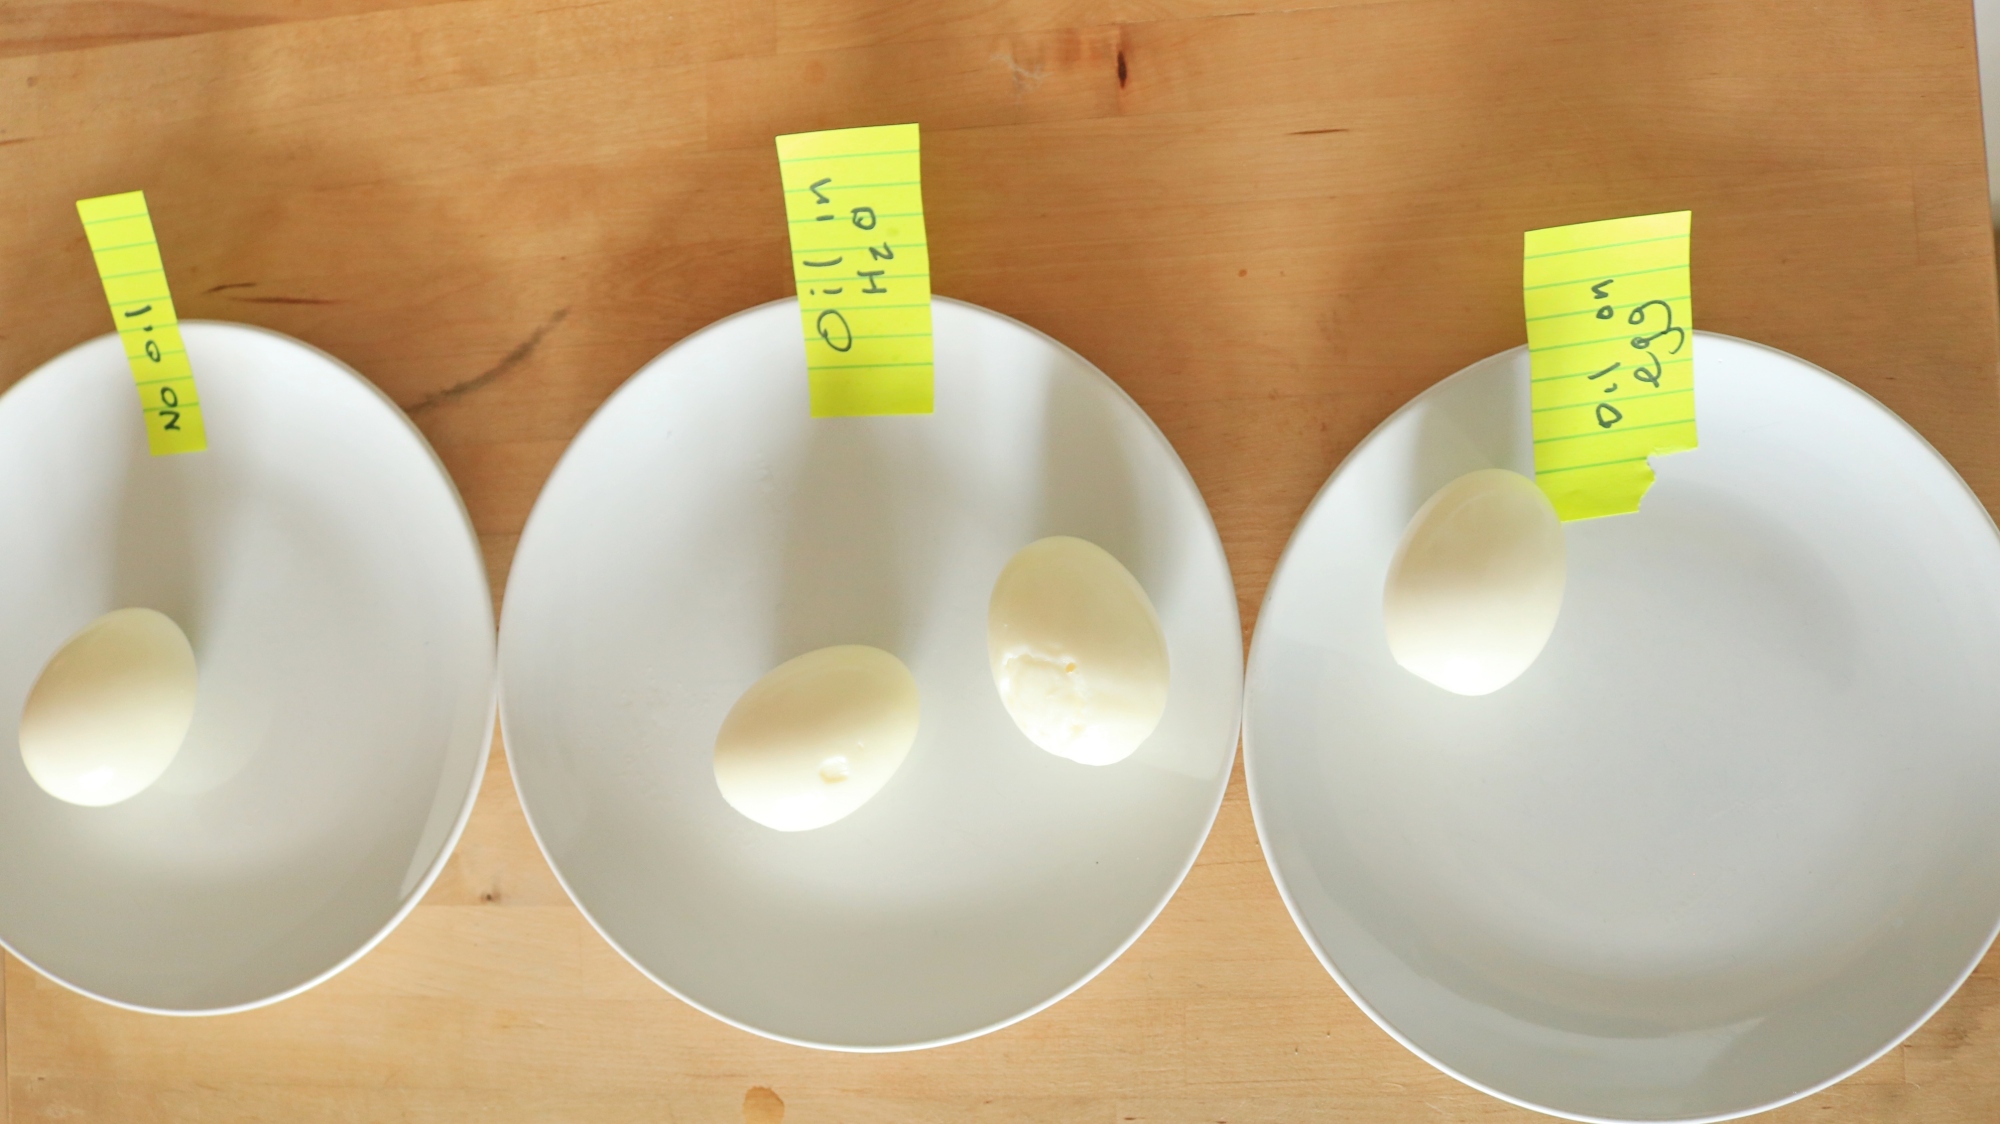 Hardboiled eggs on plates with labels